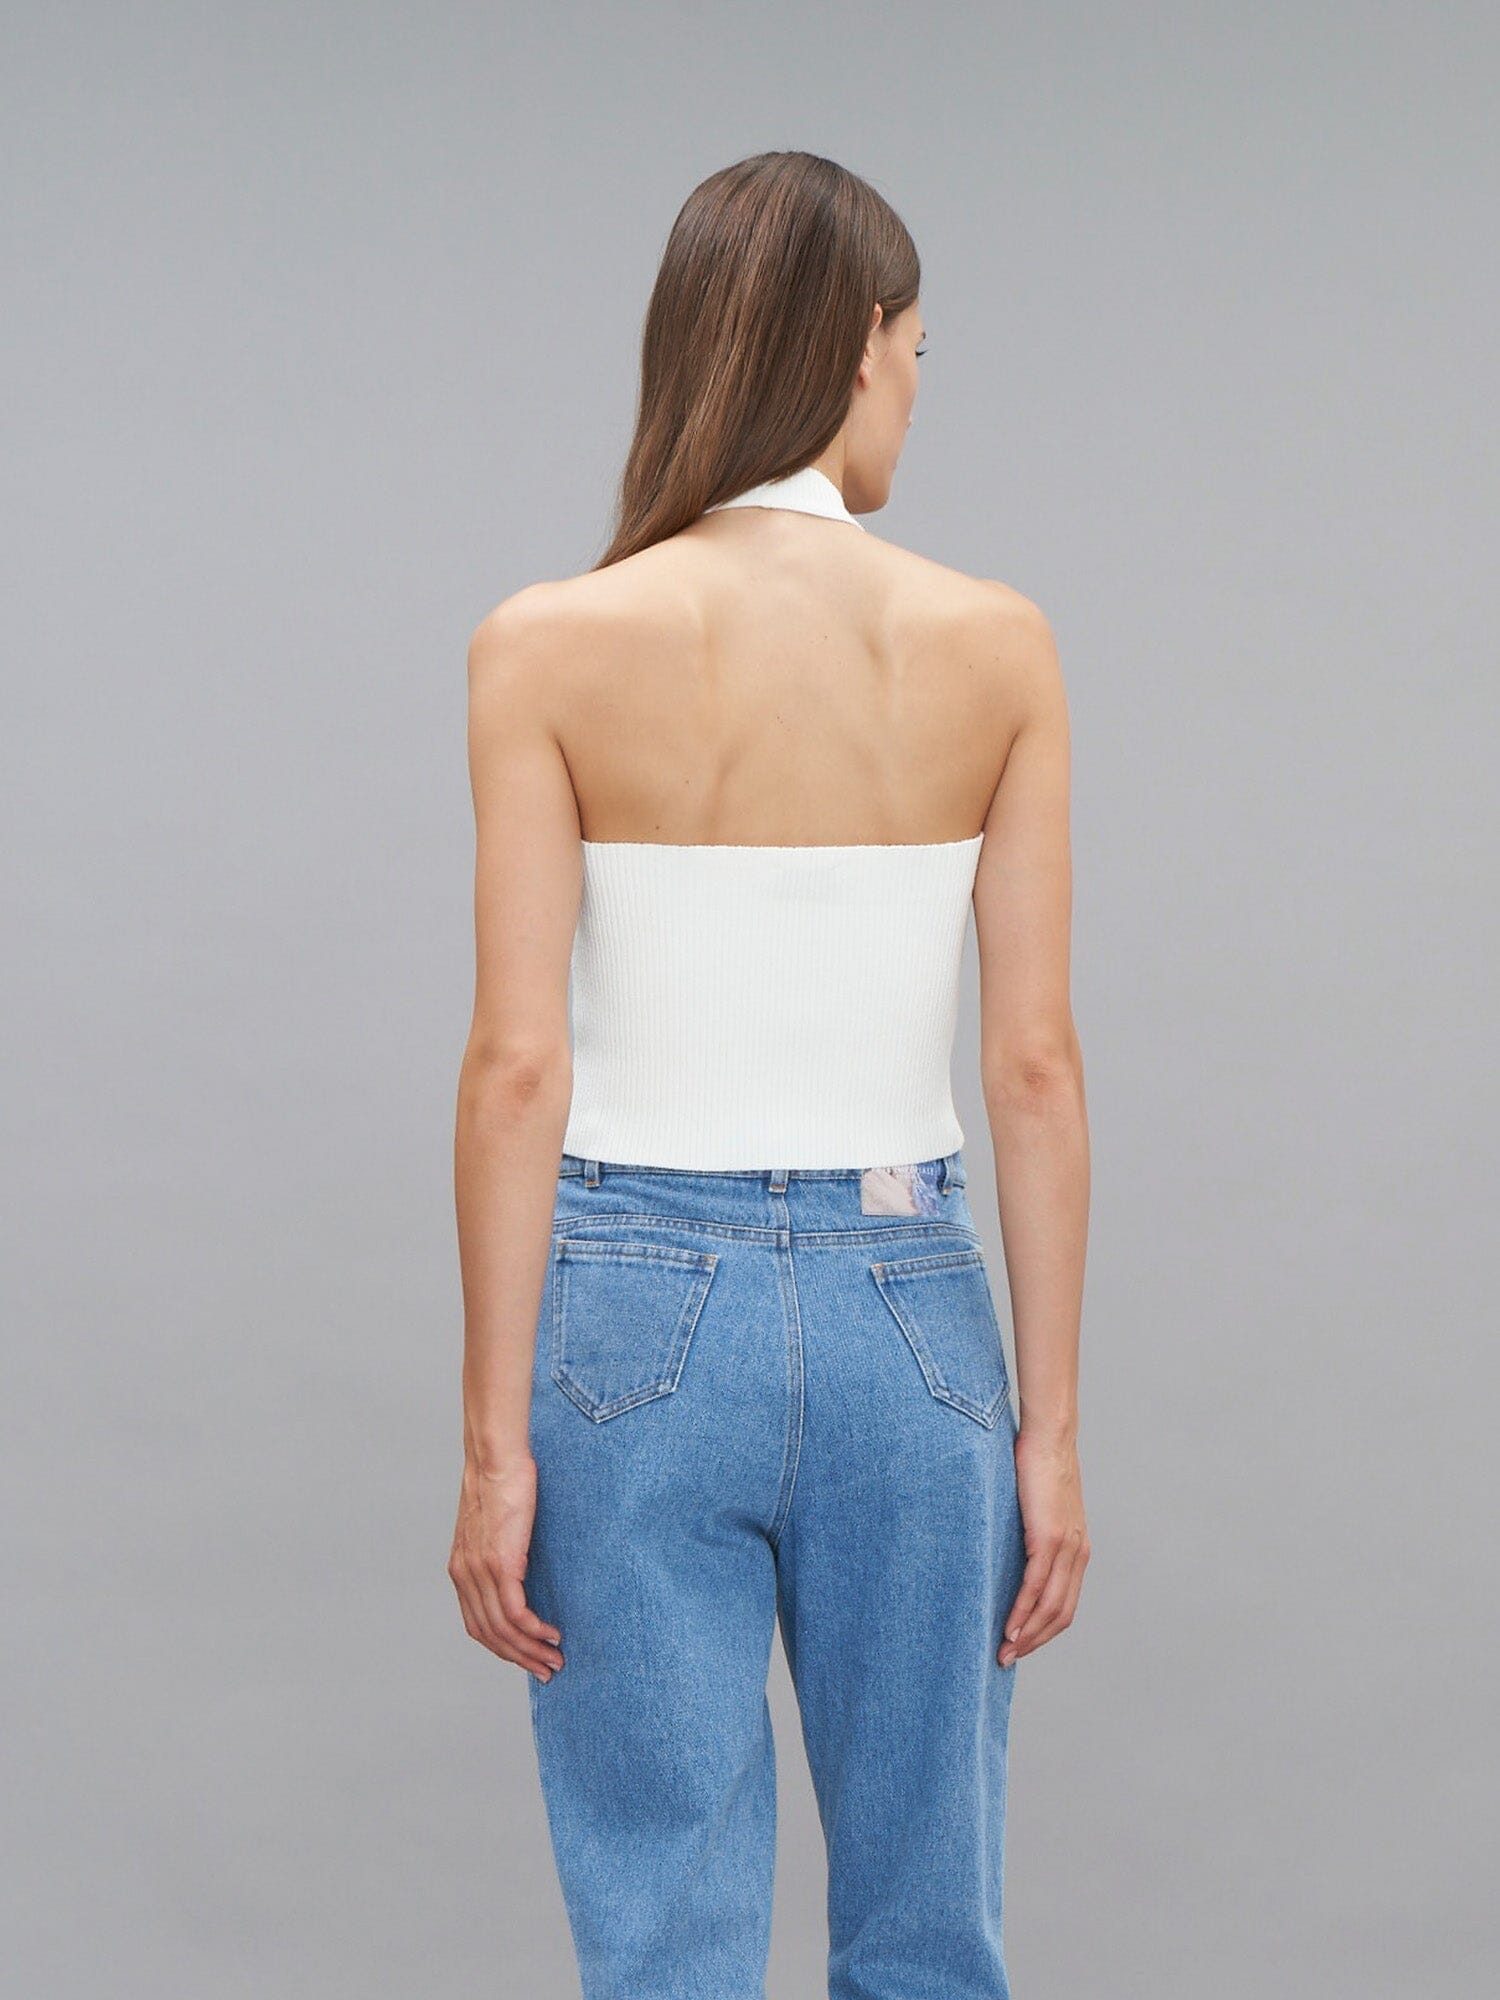 GABRIELLE - Sleeveless halter top in ribbed knit Oeko-Tex White Top Fête Impériale